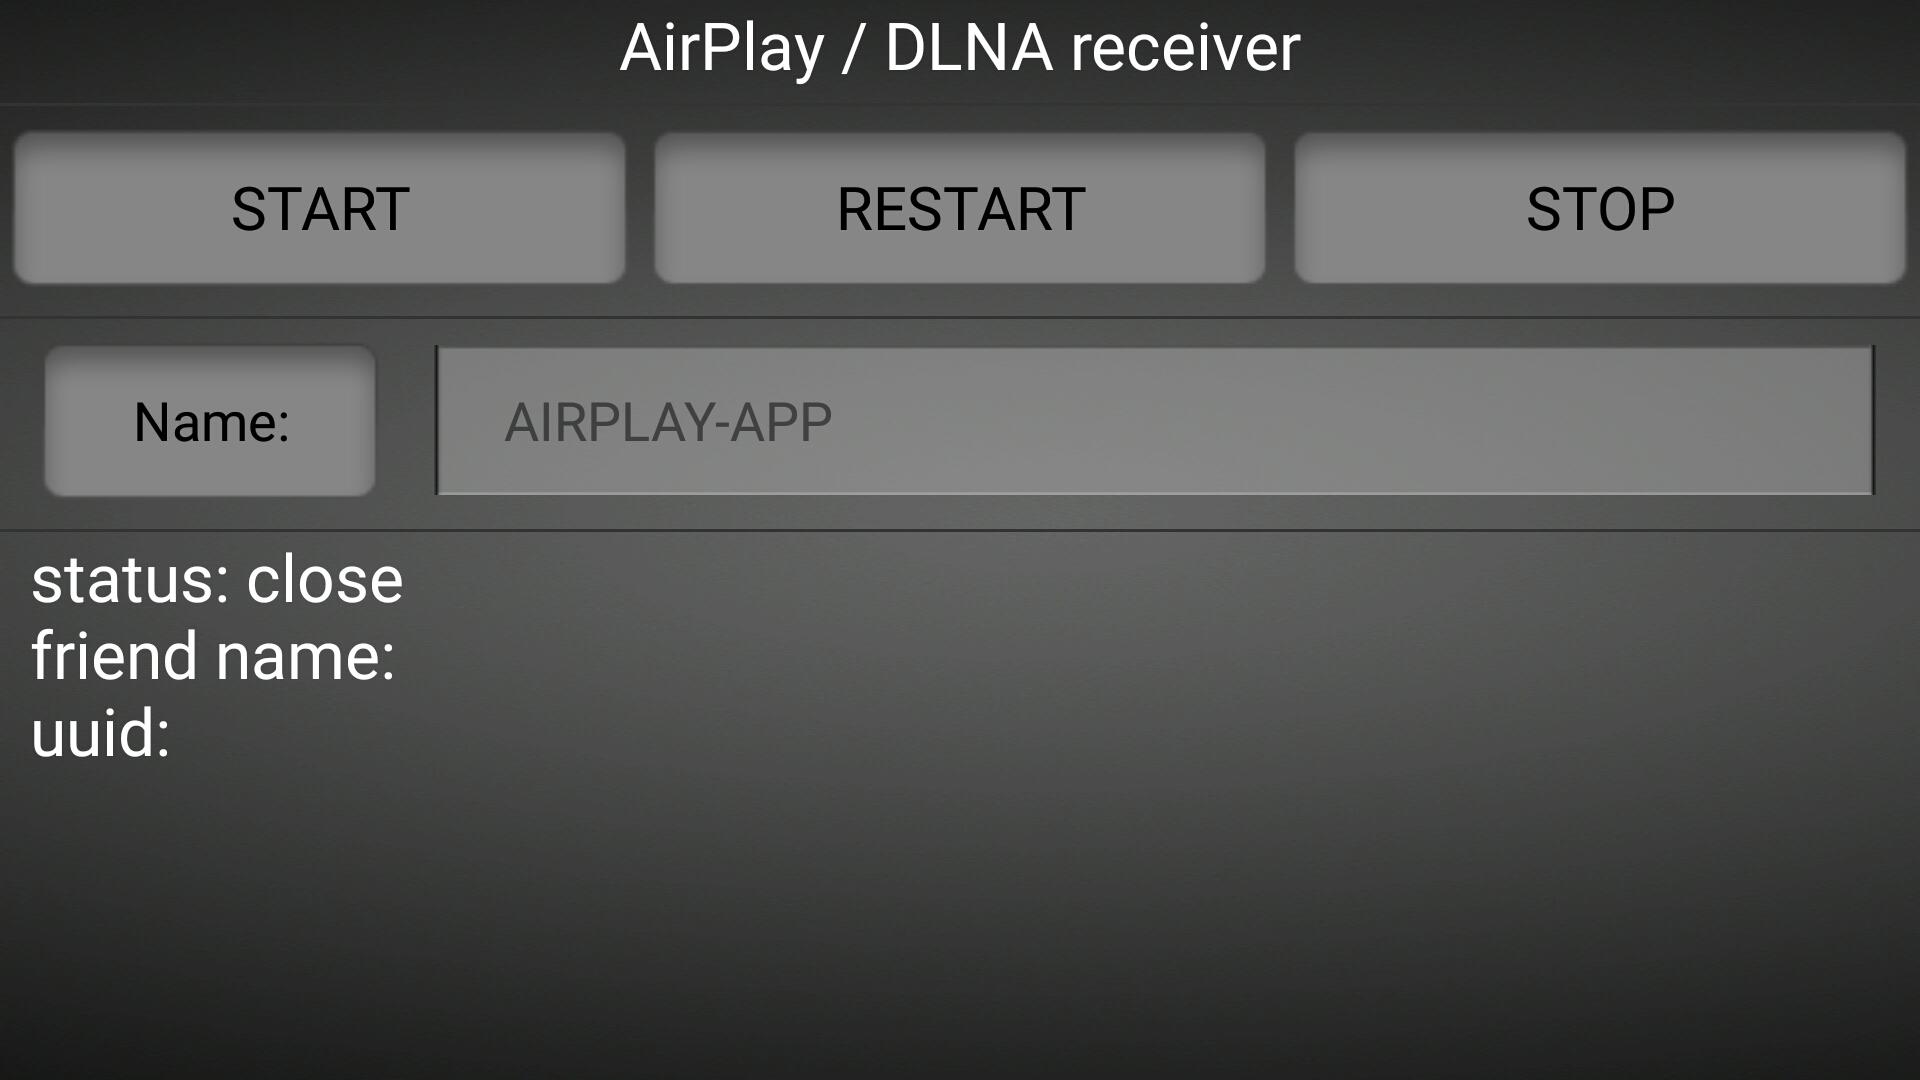 Airplay выбор источника. Аналог Airplay Receiver для андроид. Android TV приложение AIRPAY. Air Receiver Cast DLNA. The unforgiven airplay mix